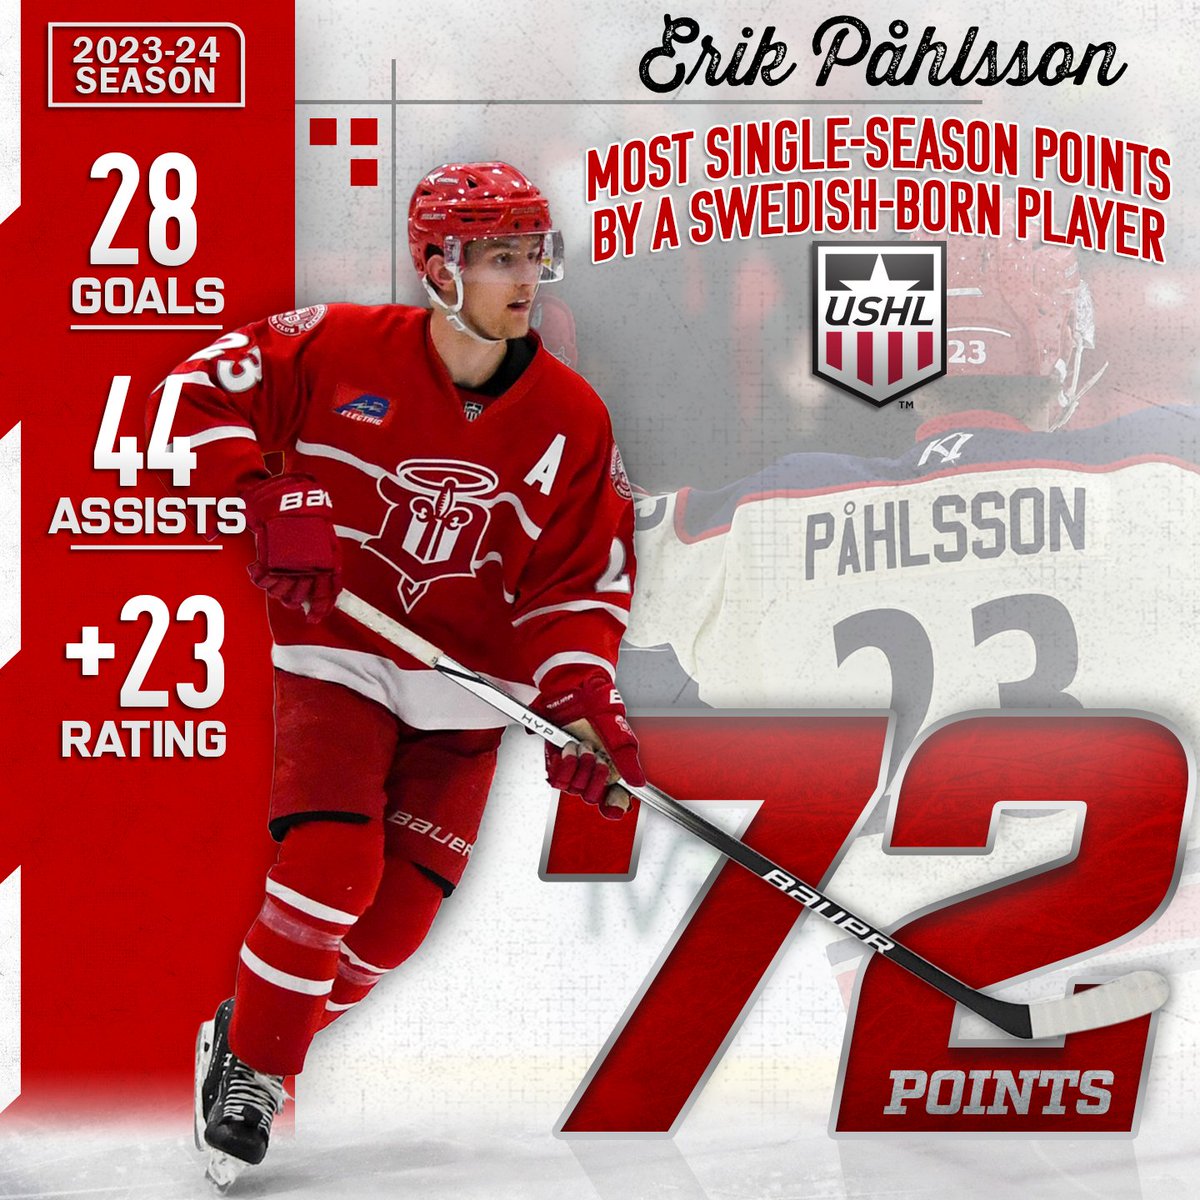 A signature season for the Swede! Erik Påhlsson's 72 points are a @USHL record for the most in a single season by a Swedish-born player! #HalosHigh